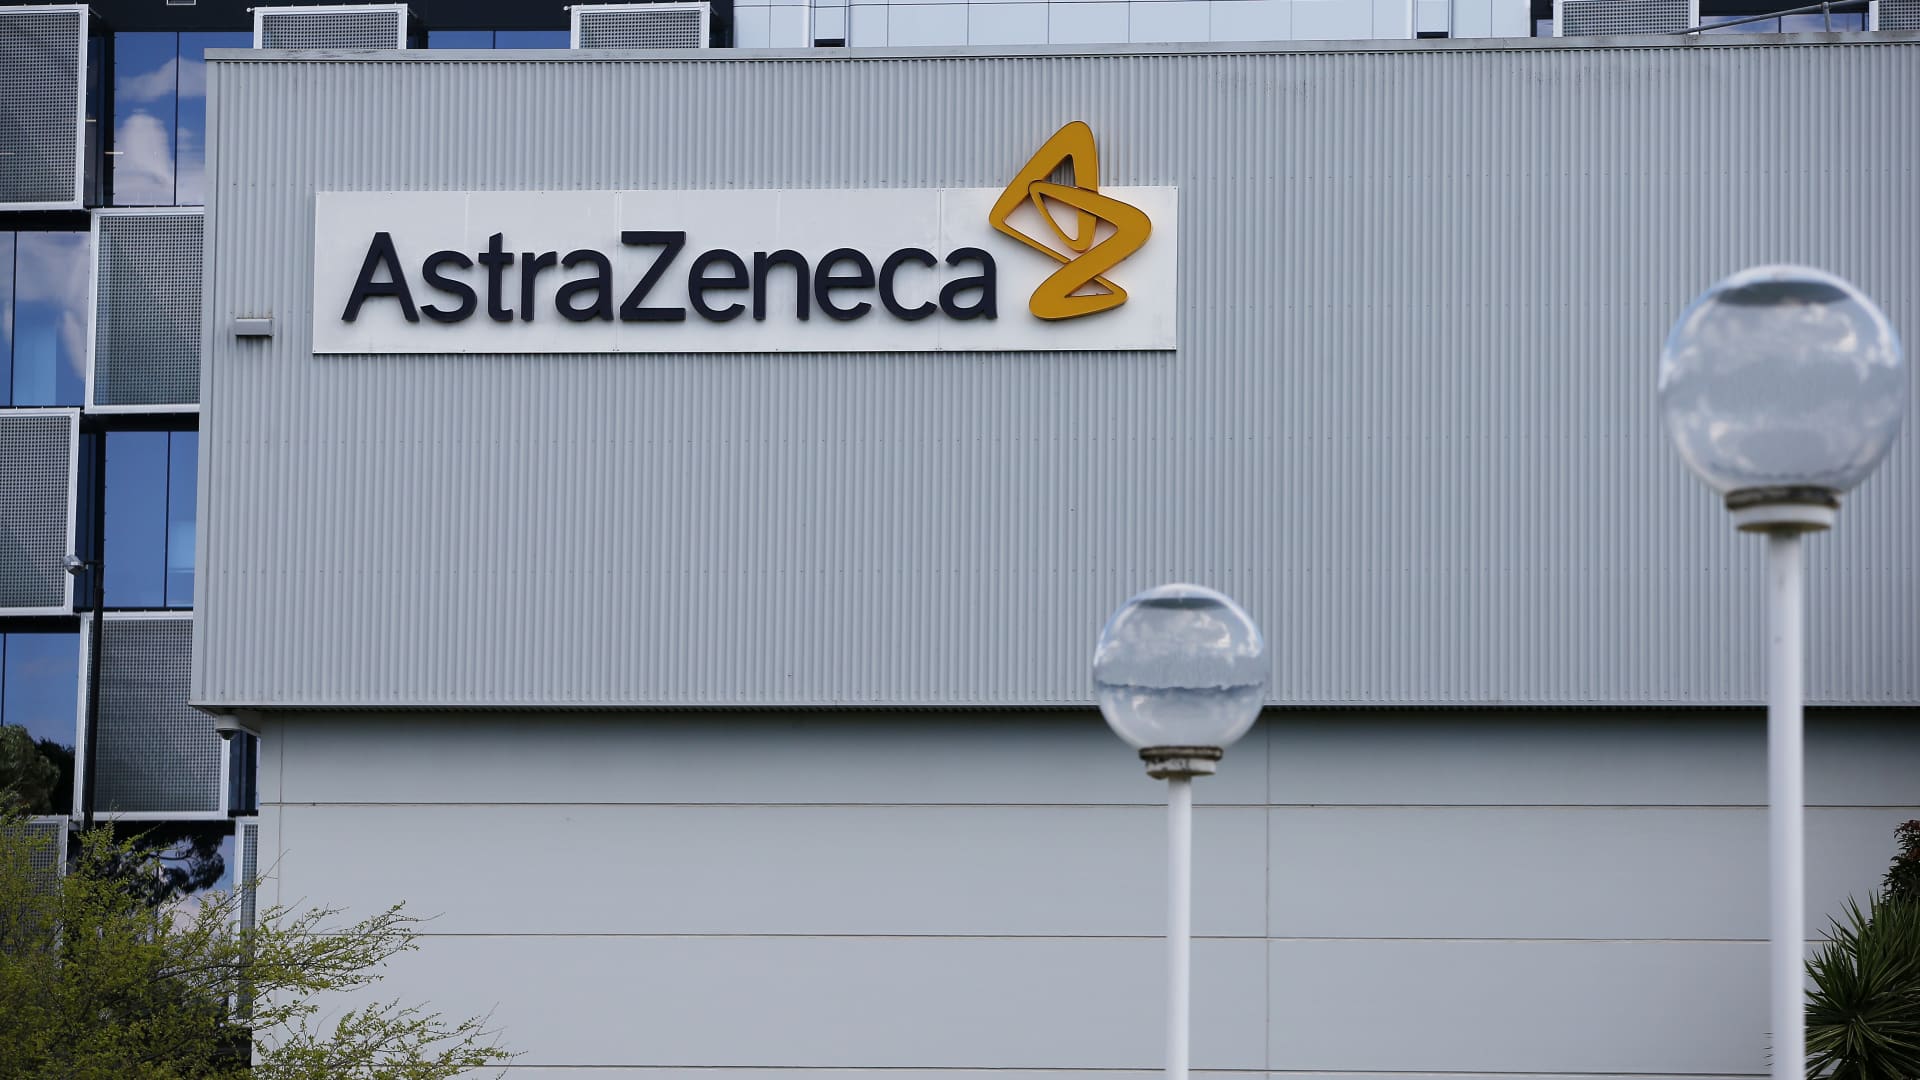 A view of an AstraZeneca facility is seen during Prime Minister Scott Morrison's visit on August 19, 2020 in Sydney, Australia.